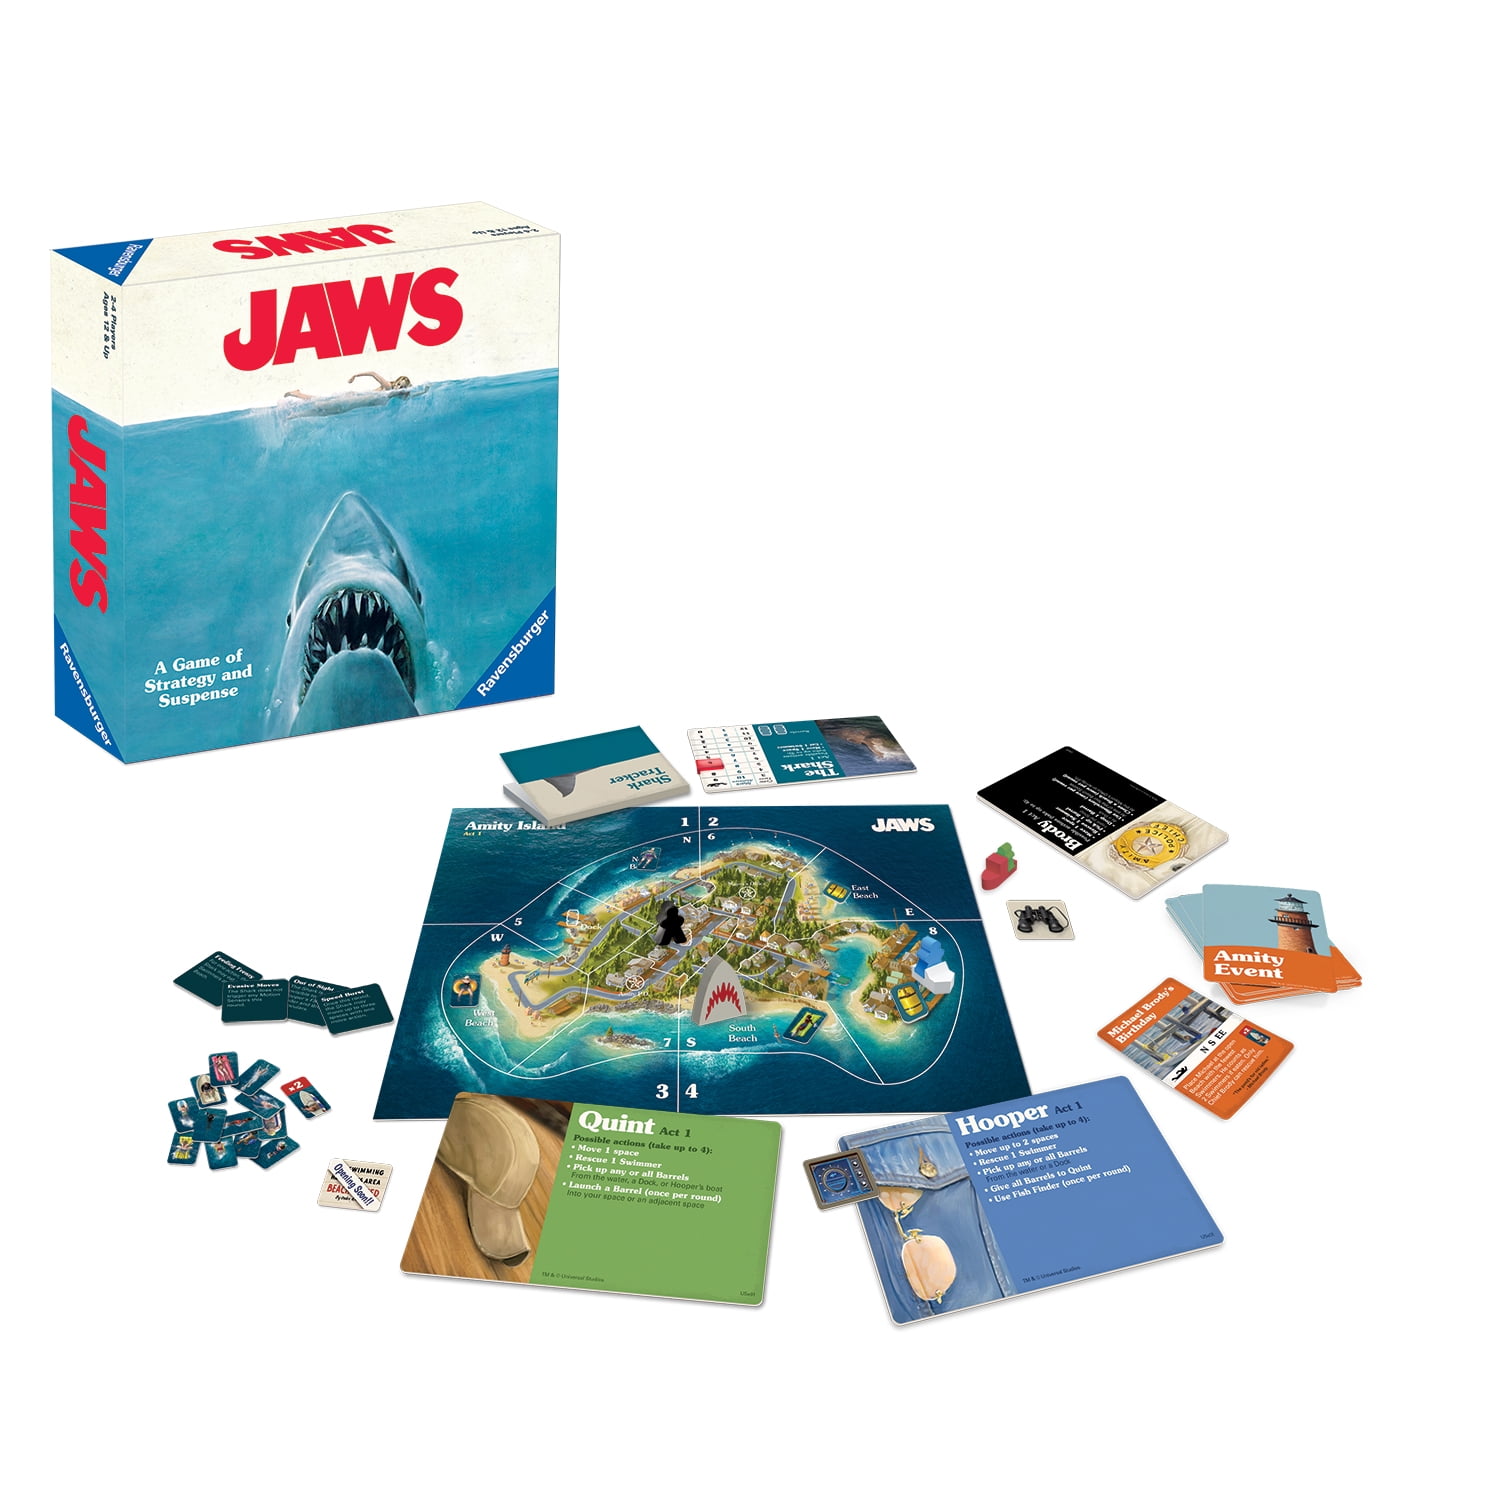 Ravensburger Jaws Strategy & Suspense Board Game 45-60 Mins 2-4 Players 